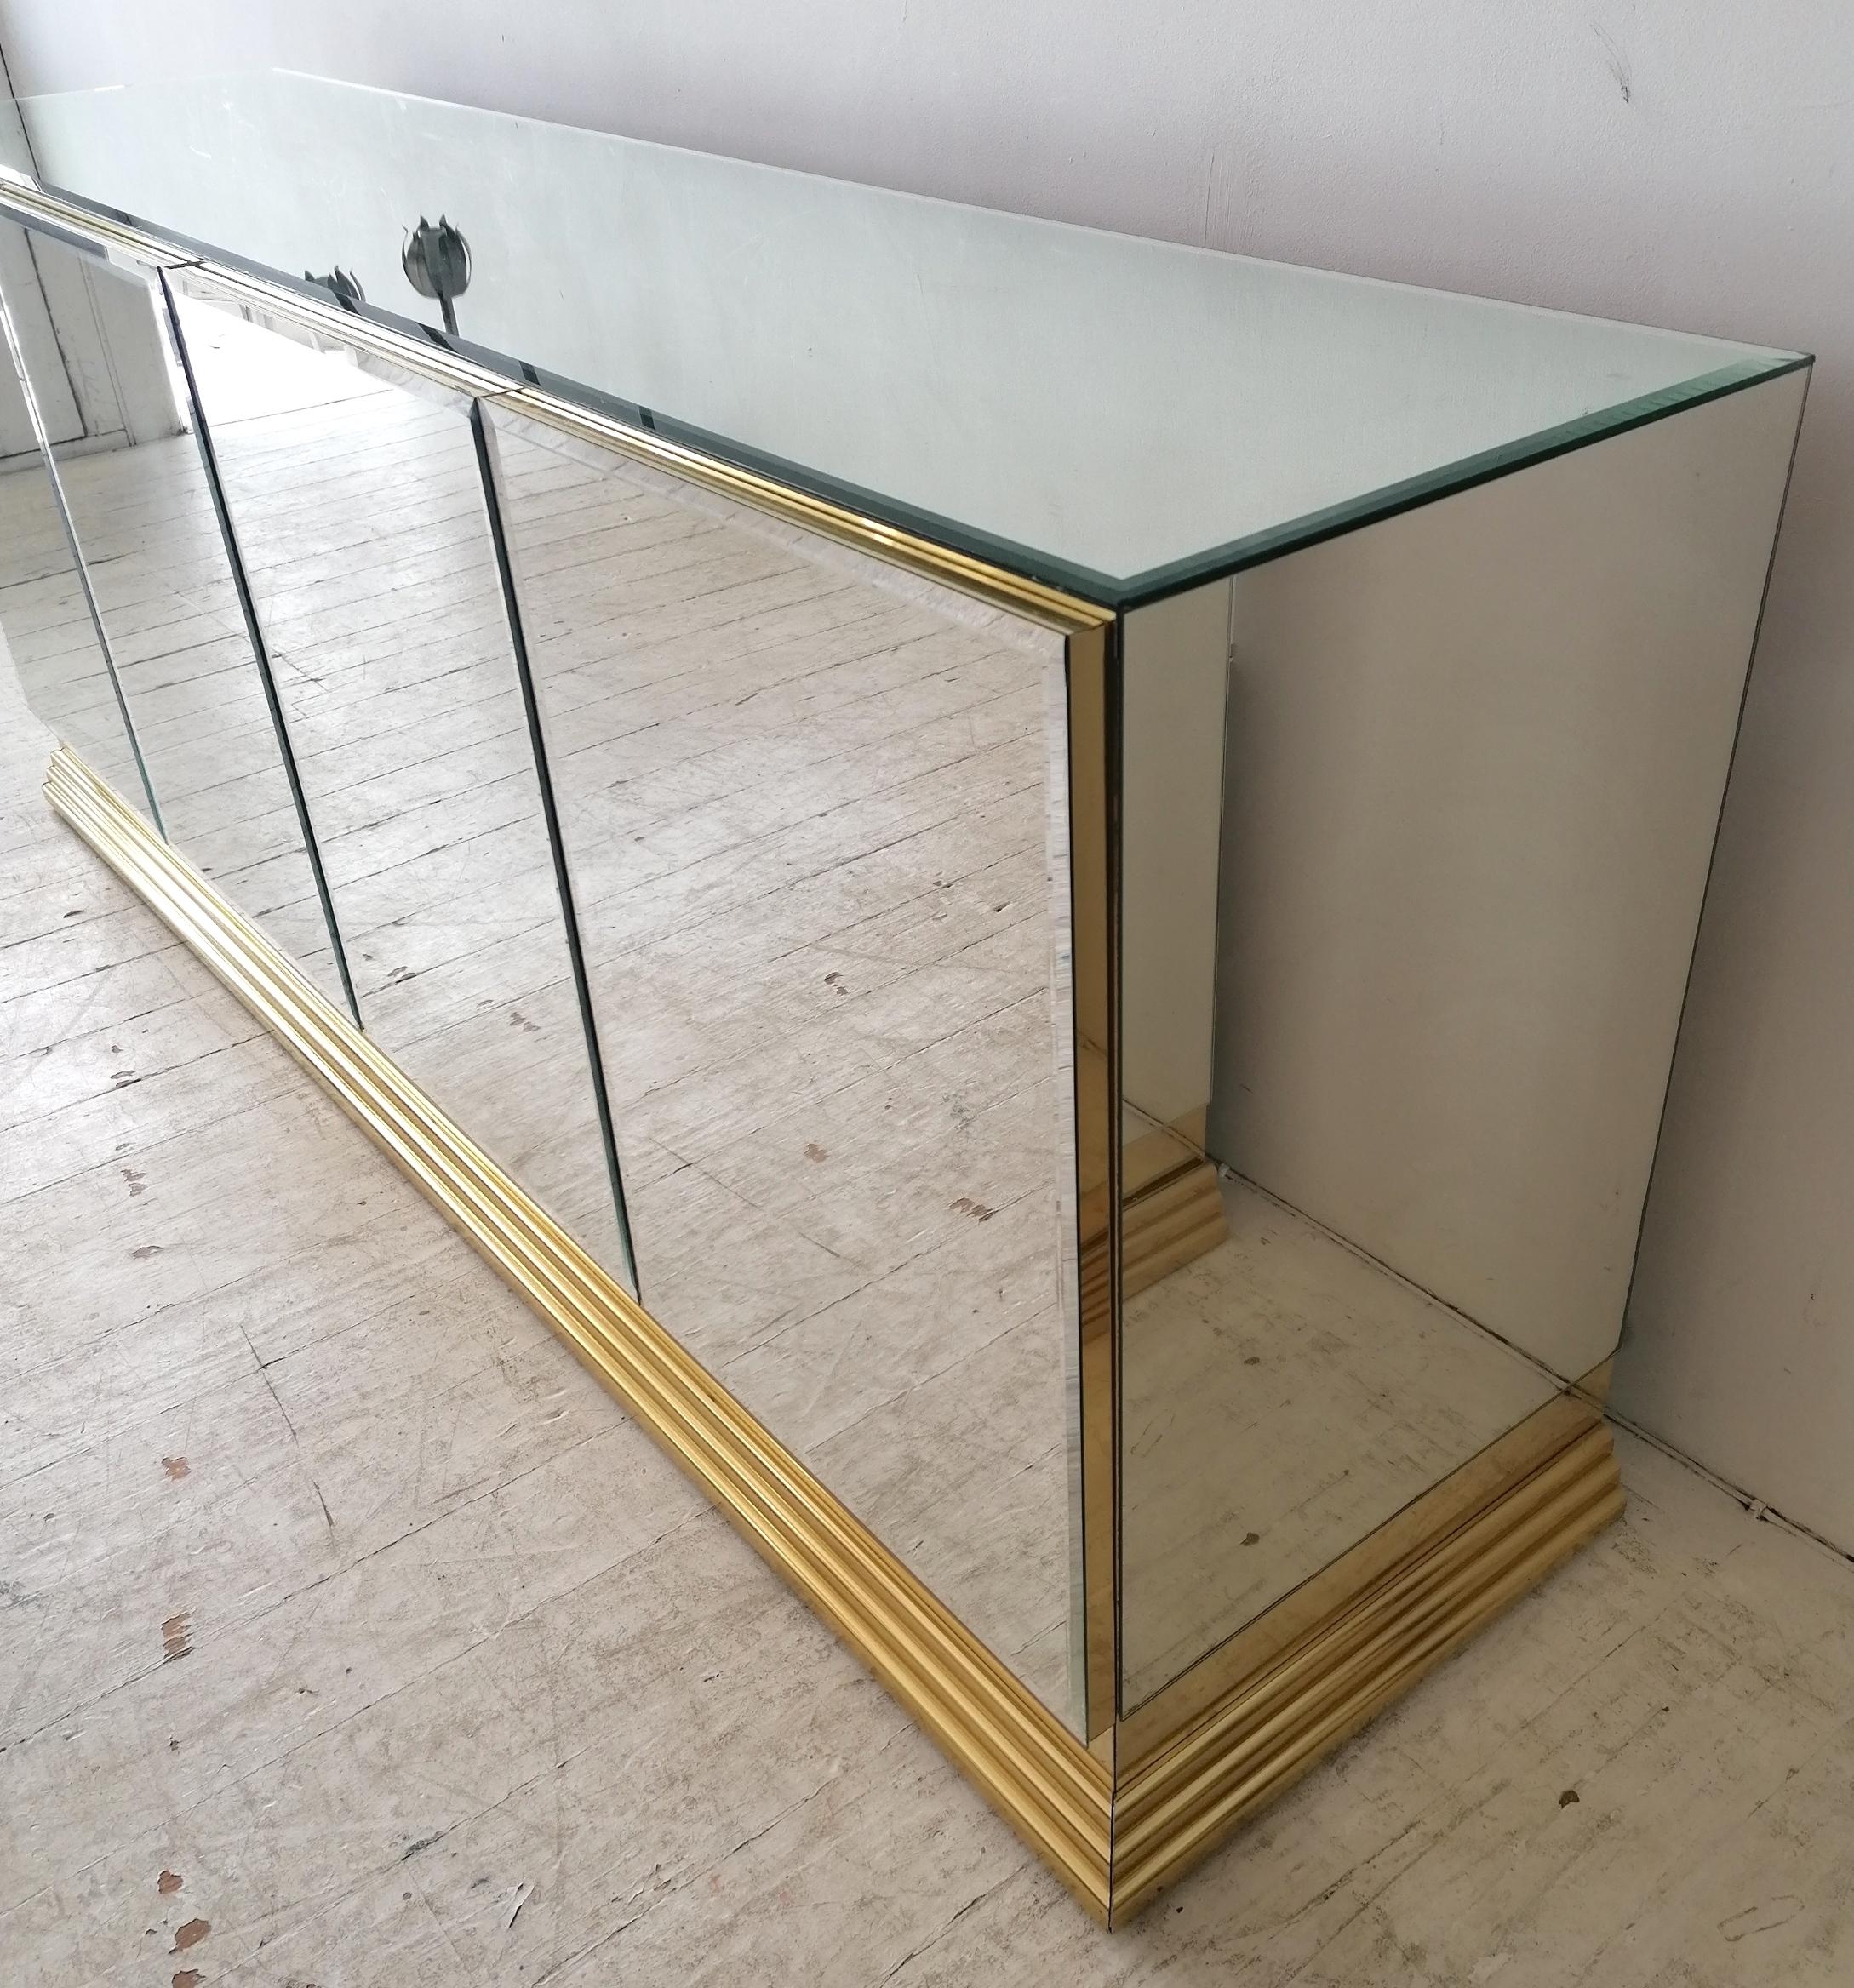 Vintage American Mirrored Glass Sideboard By Ello Furniture, 1970s 1980s 9